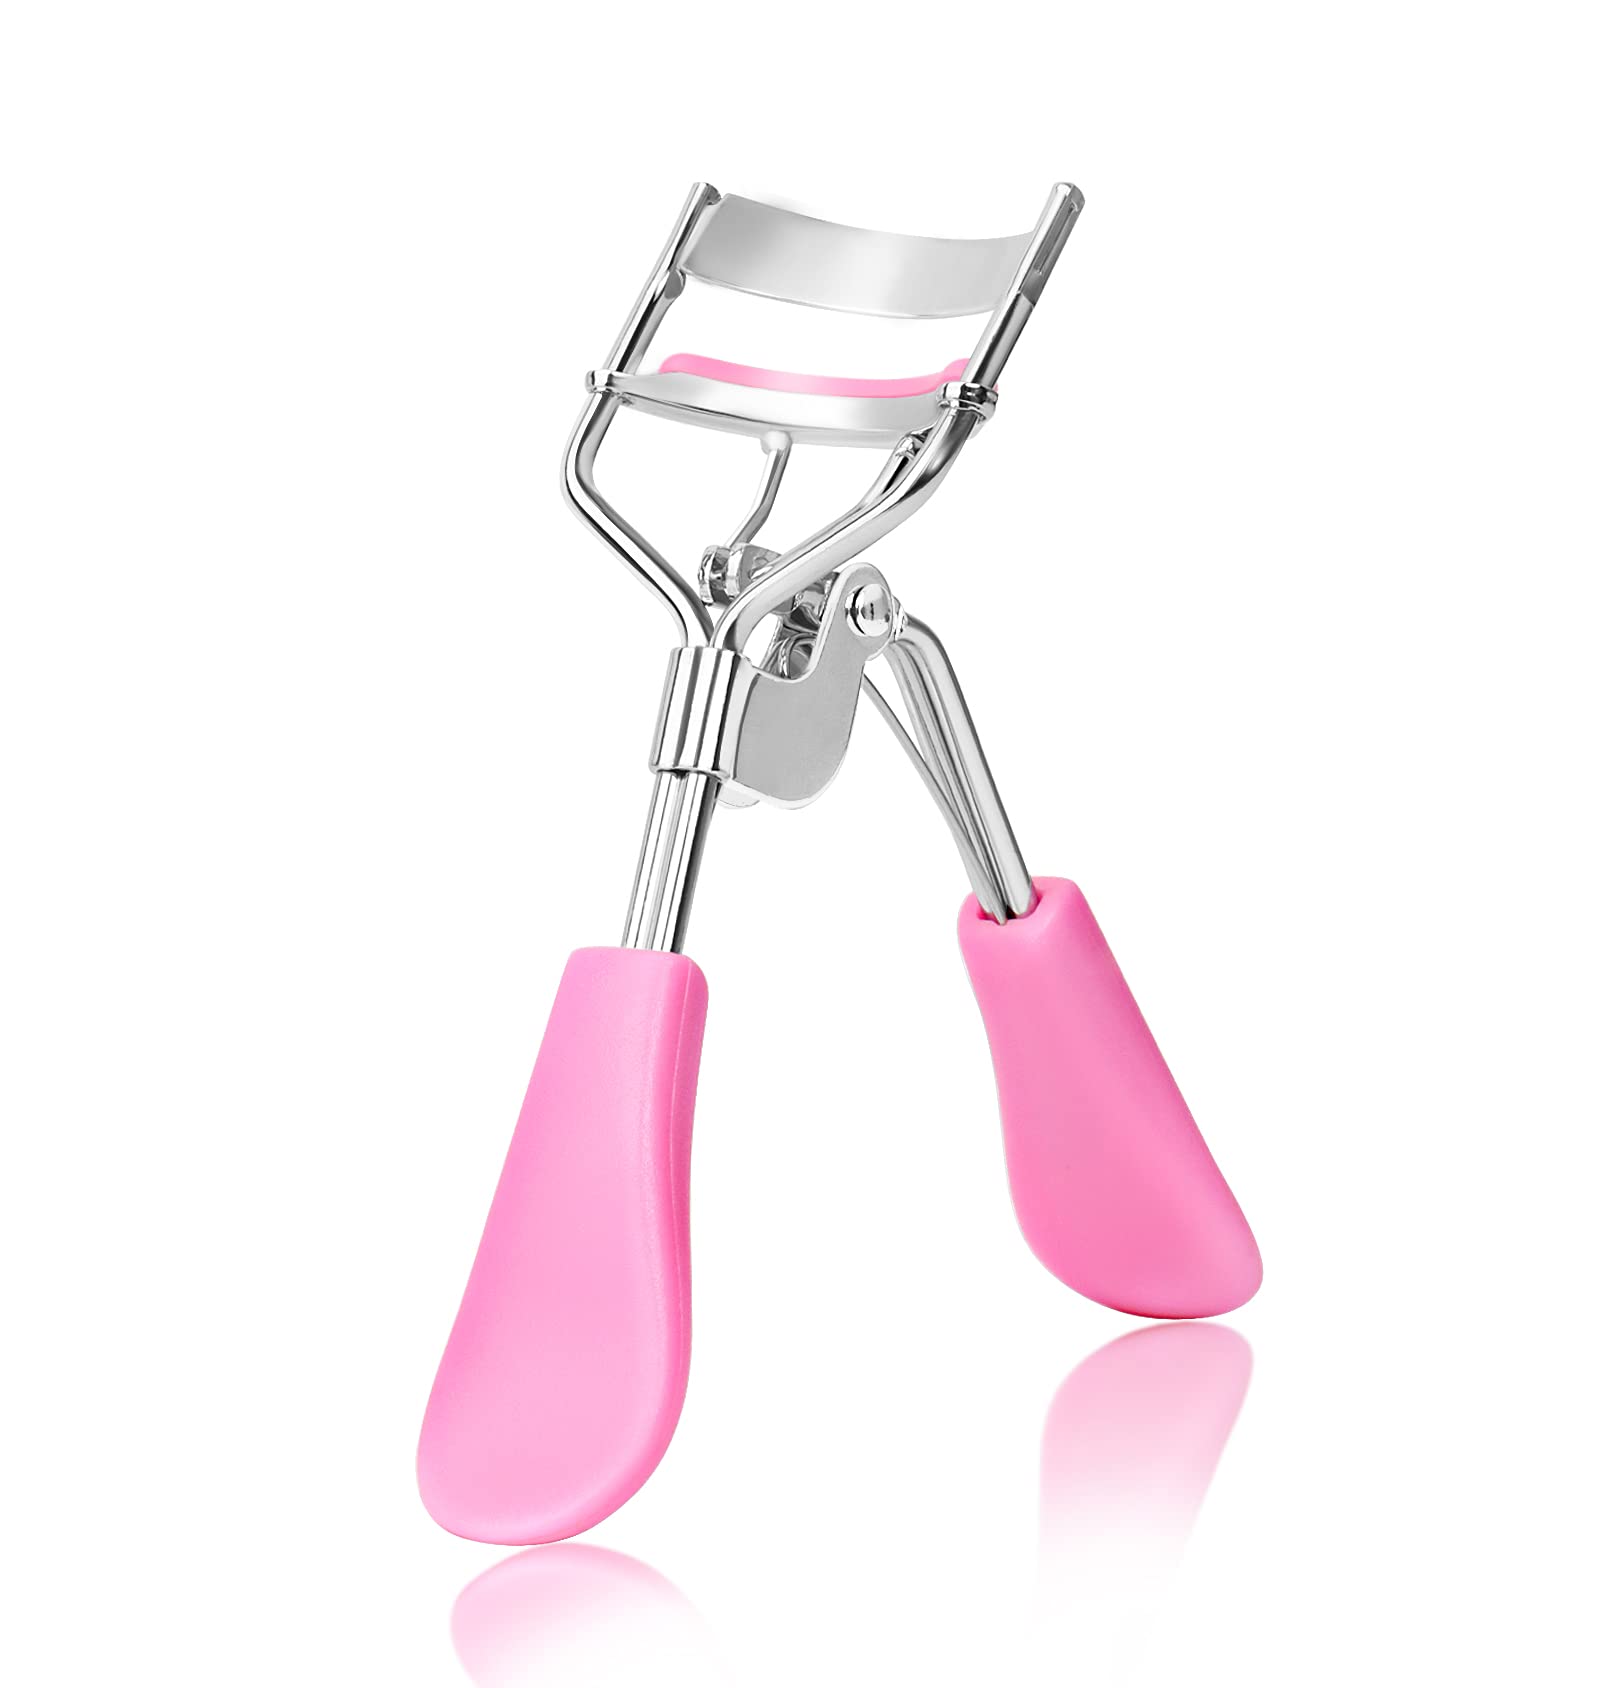 Professional Eyelash Curler, Stainless Steel Lash Curler with Silicone Pad, Beauty Makeup Tool with Comfortable Handle Fits All Eye Shapes, Pink